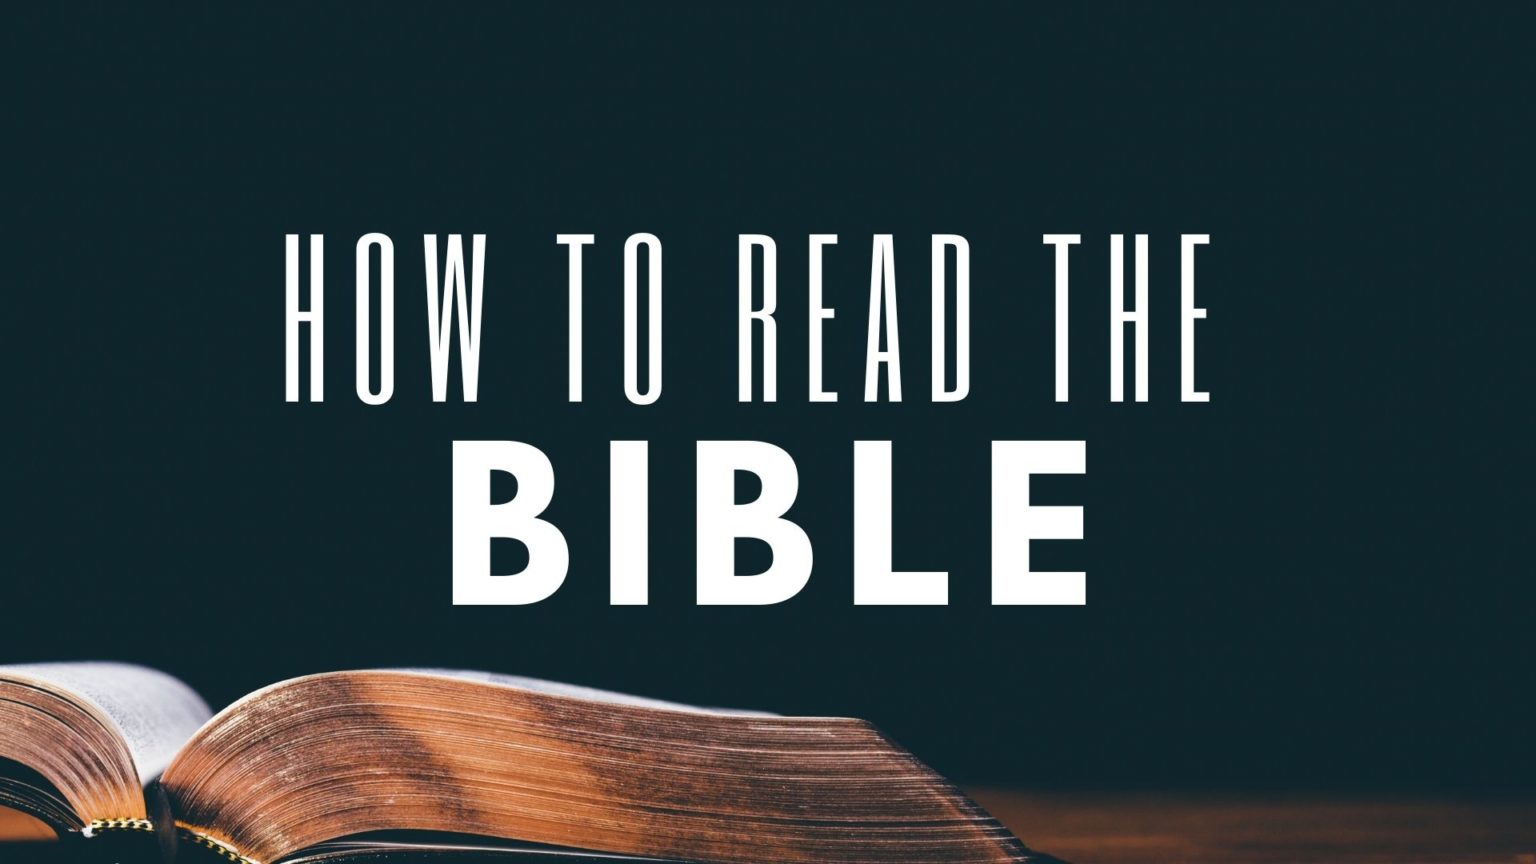 How to Read the Bible - pursueGOD.org